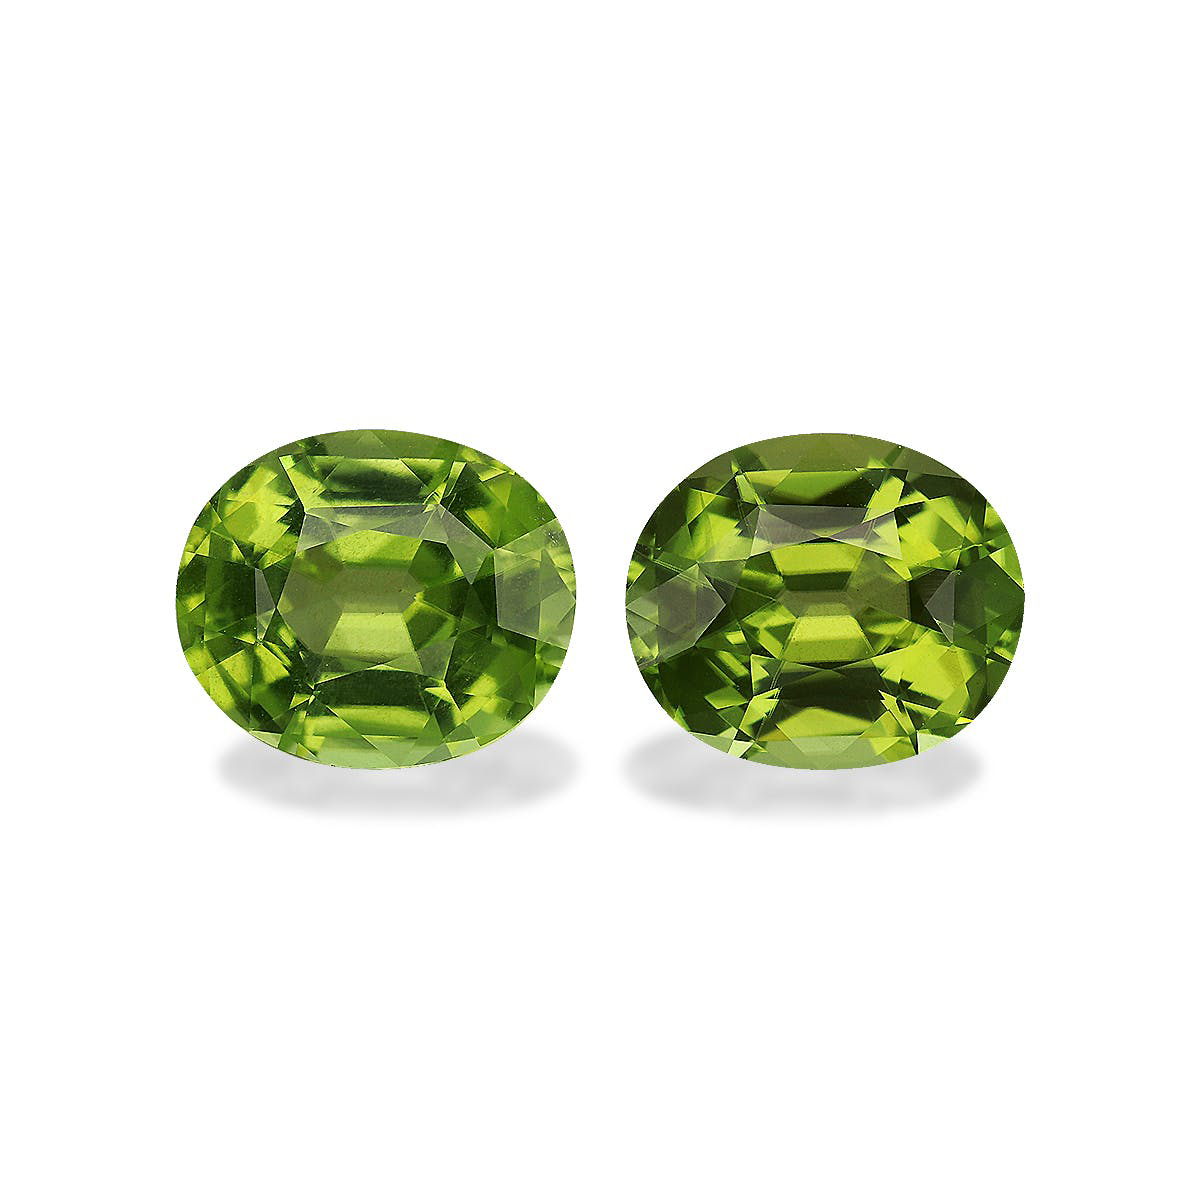 Picture of Green Peridot 5.24ct - Pair (PD0150)